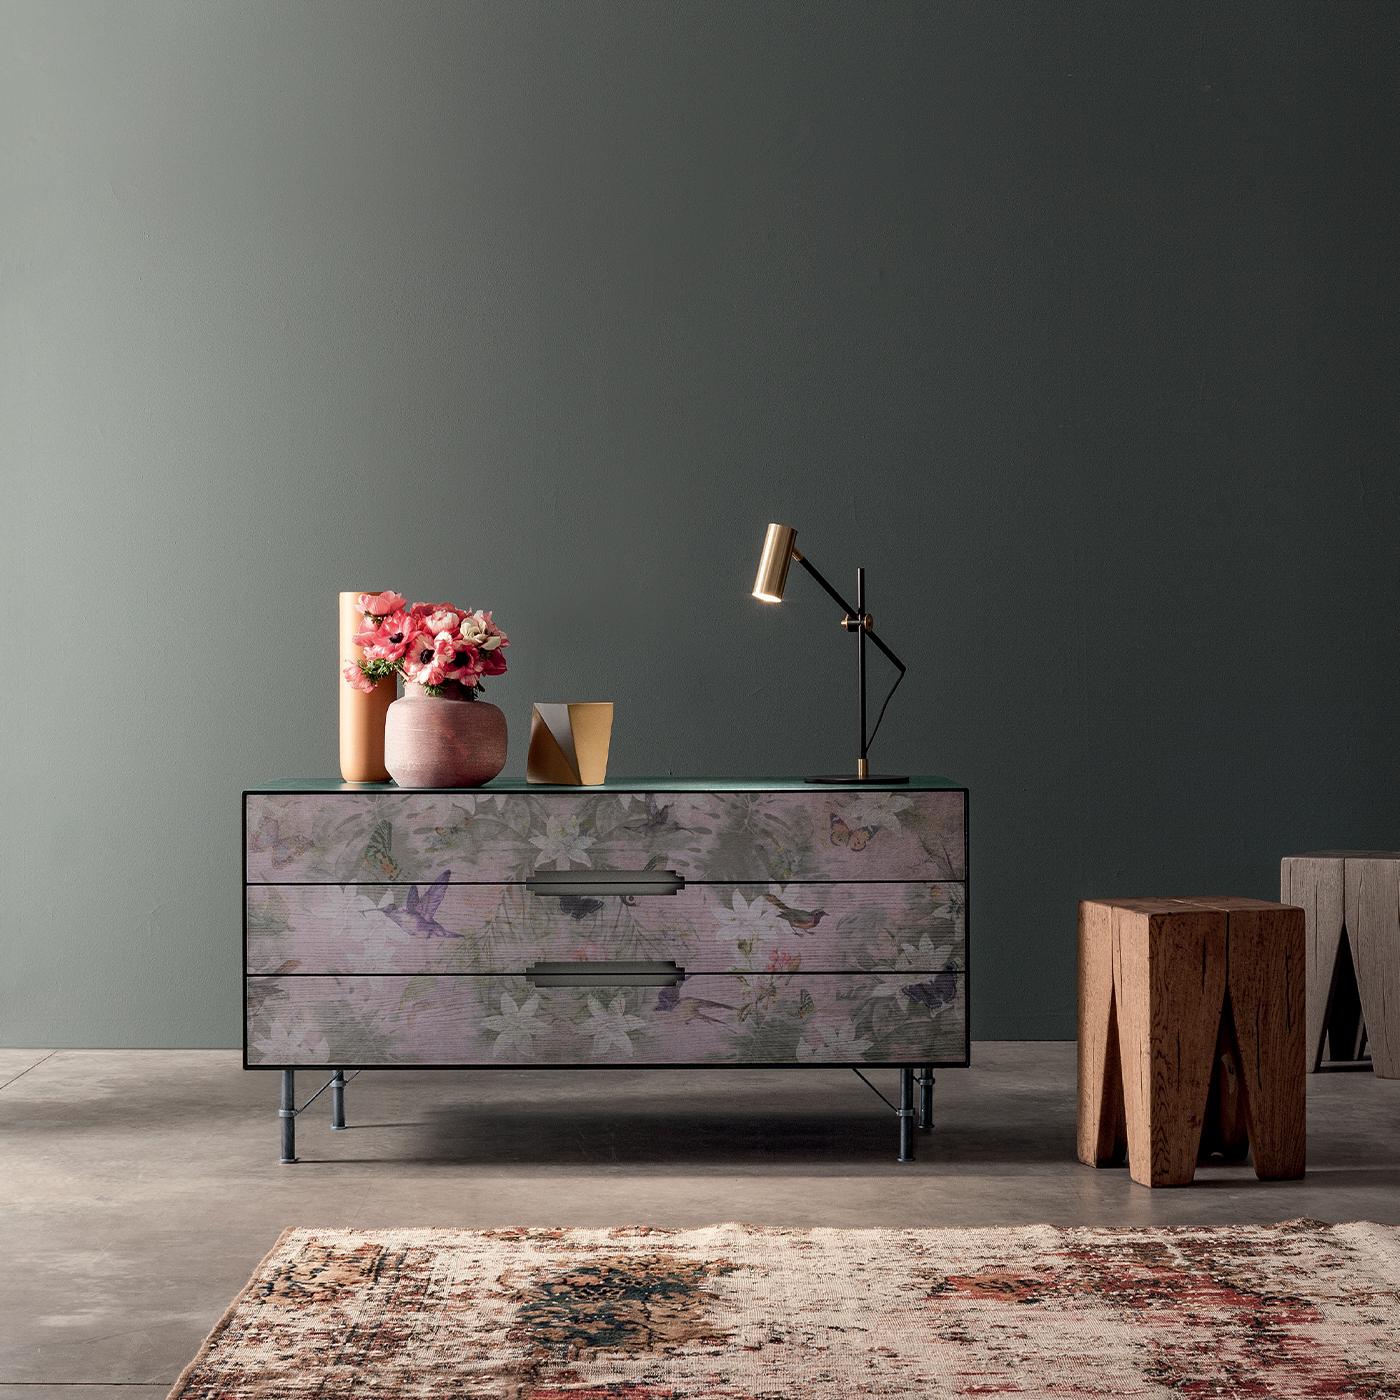 This long chest of drawers updates a Classic style with a stunning printed front, complete with flowers and birds in warm dusty hues. Its three drawers provide ample storage space, opening with sleek cutout handles. Finished with iron feet for a